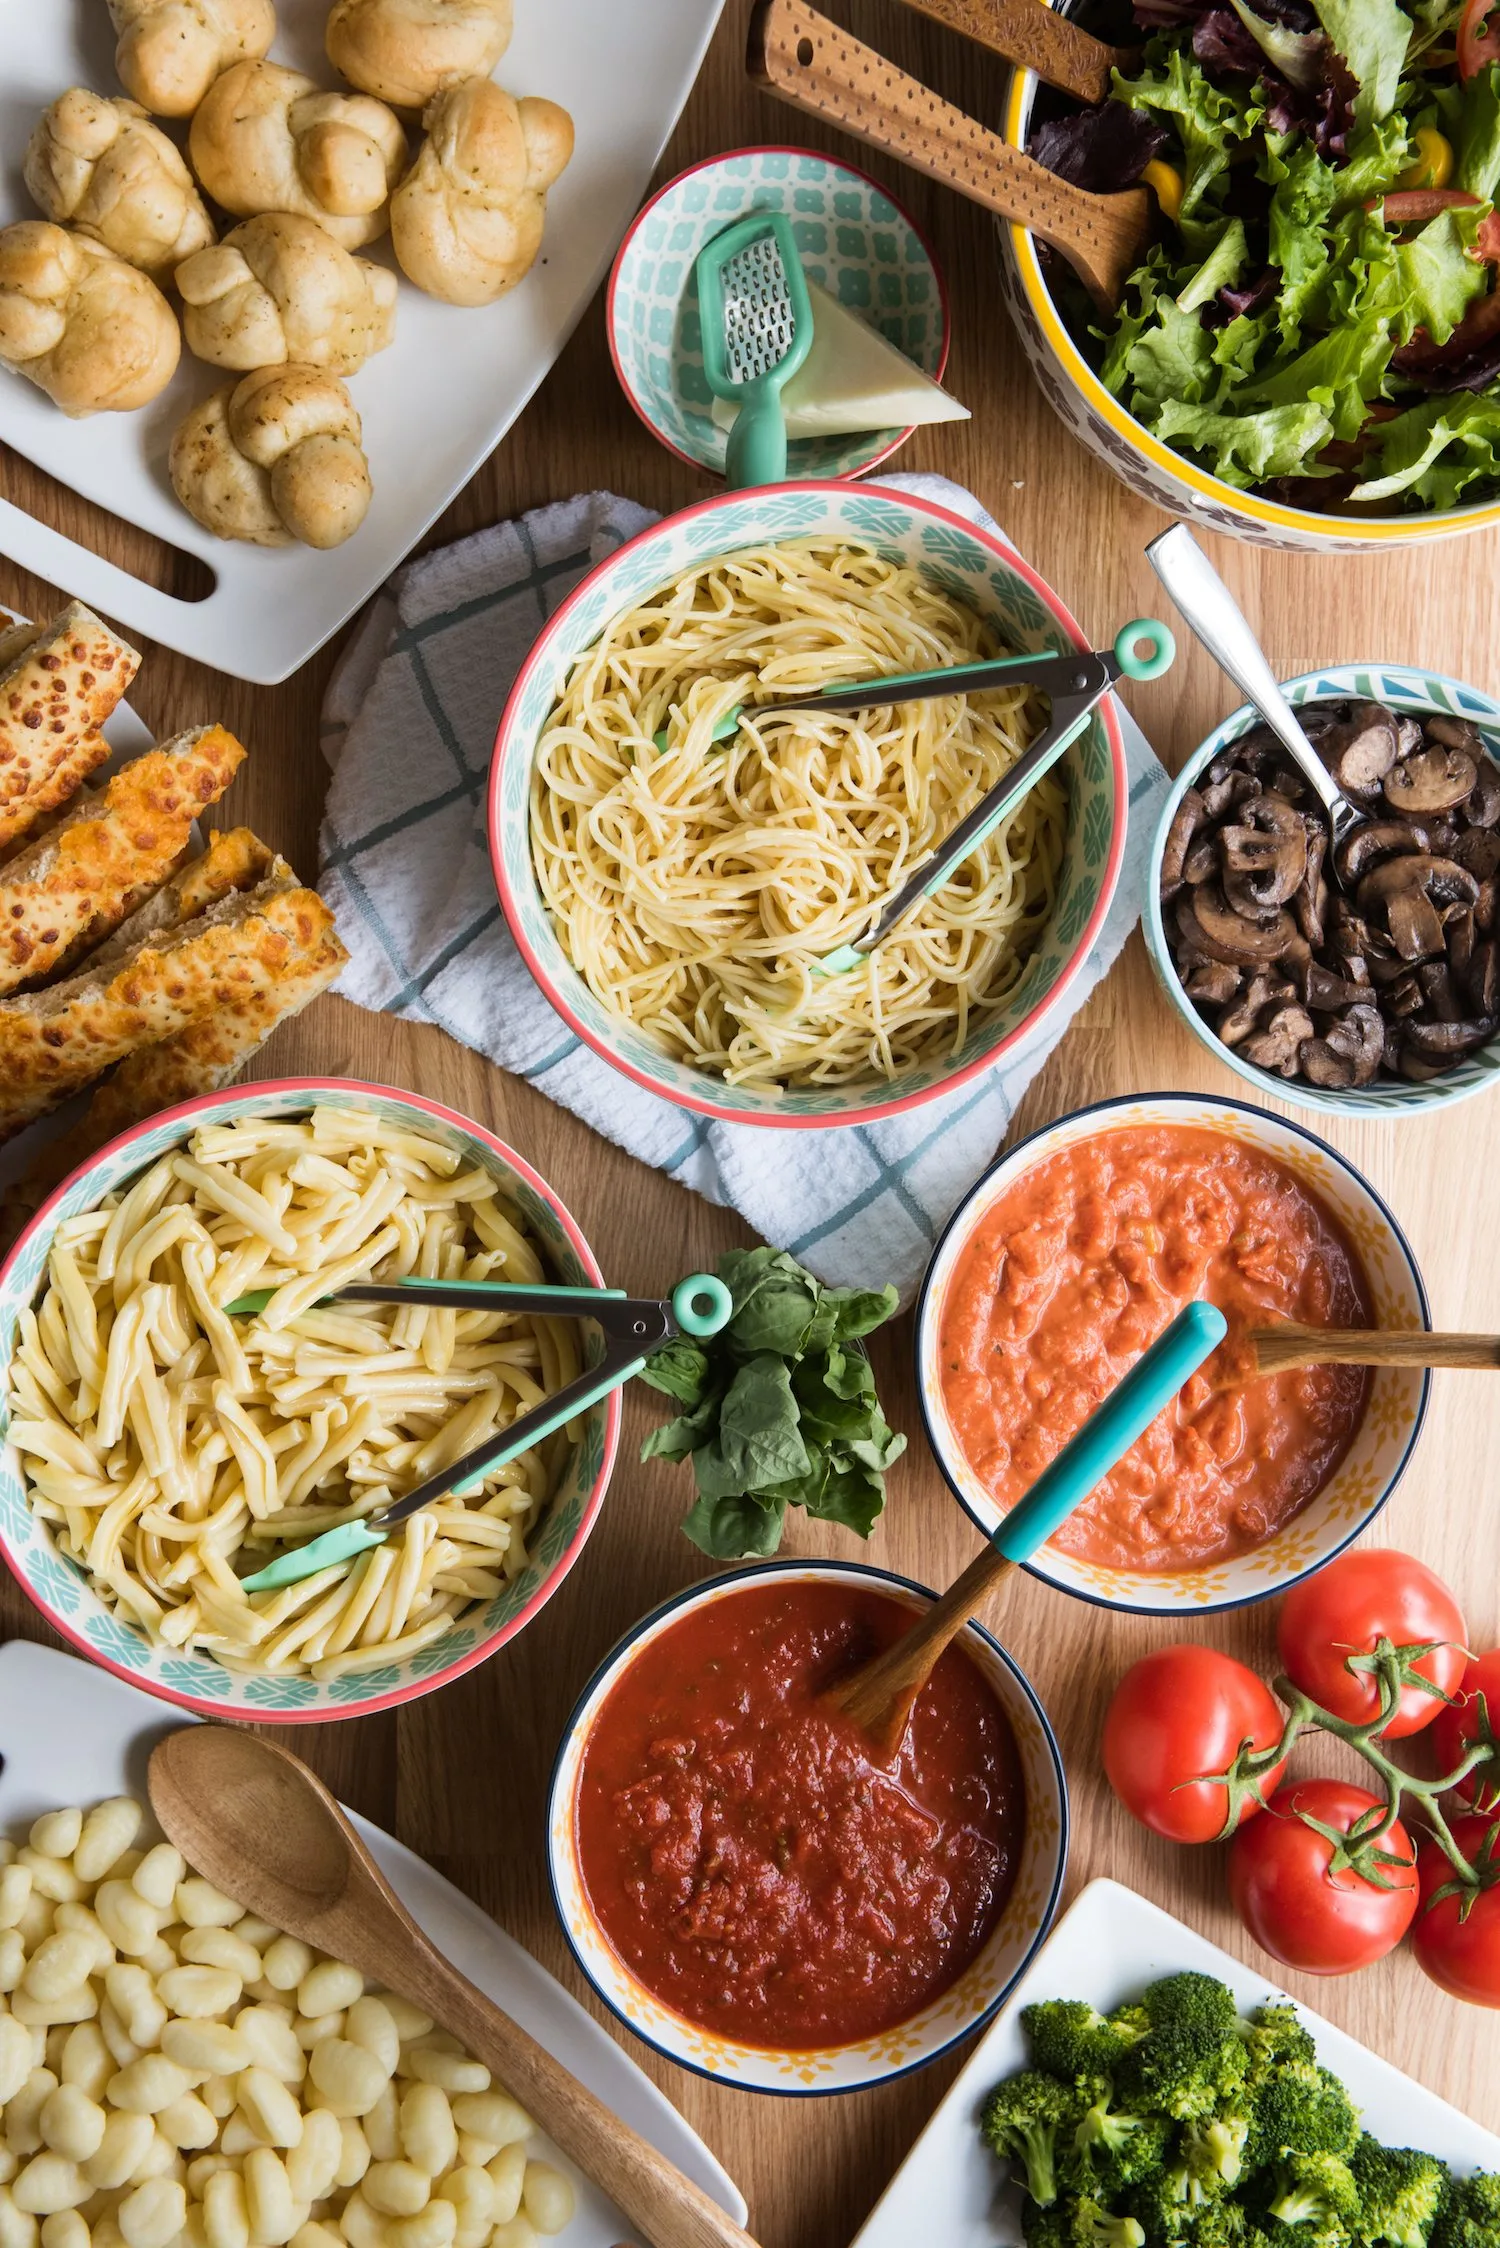 Entertain with a Make Your Own Pasta Bar | Click through to visit The Sweetest Occasion for entertaining tips, party ideas, party recipes and more from @cydconverse